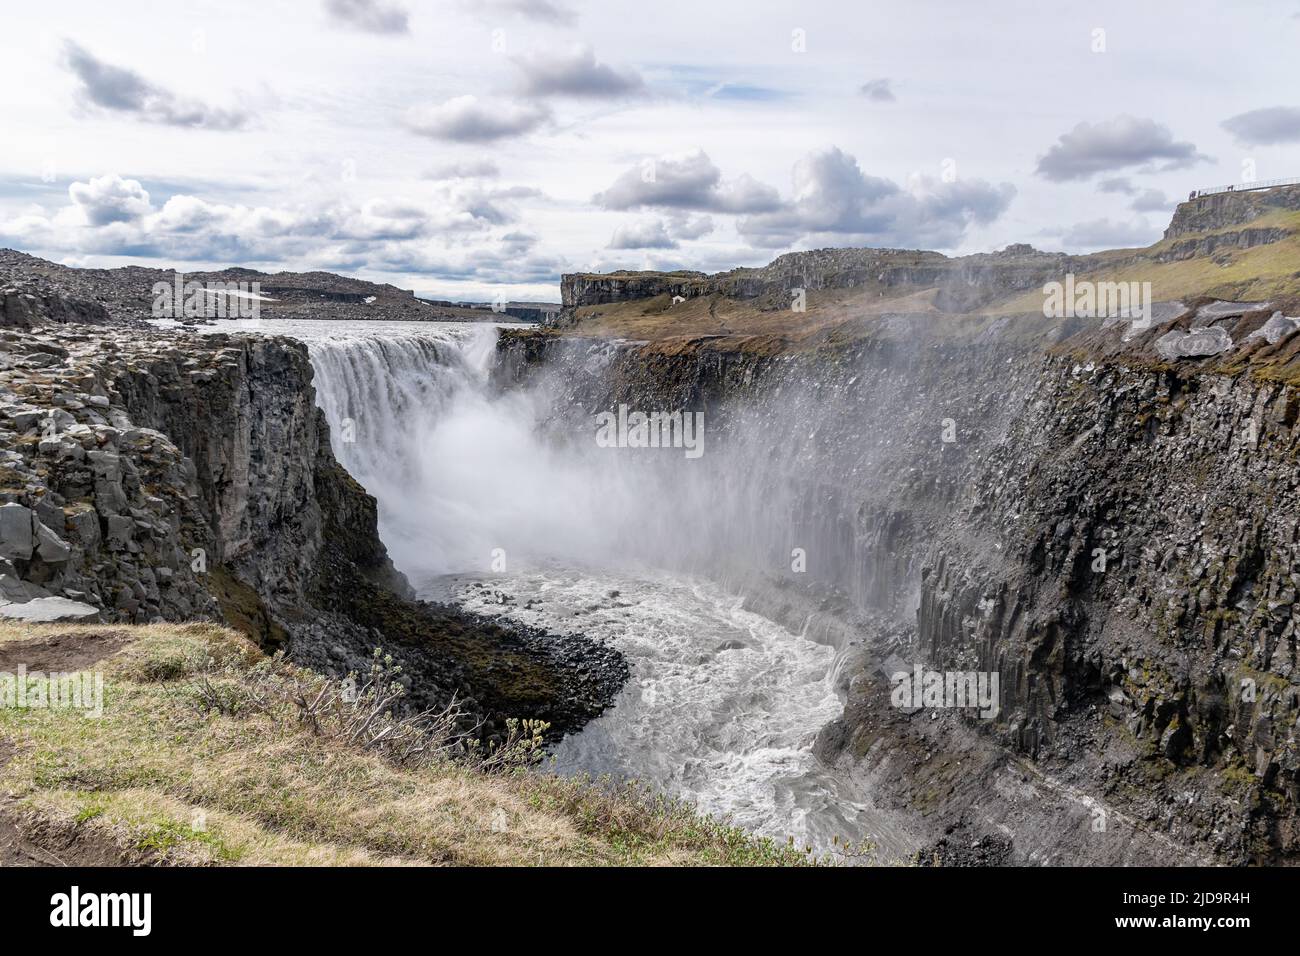 The waterfall Dettifoss in northern Iceland Stock Photo